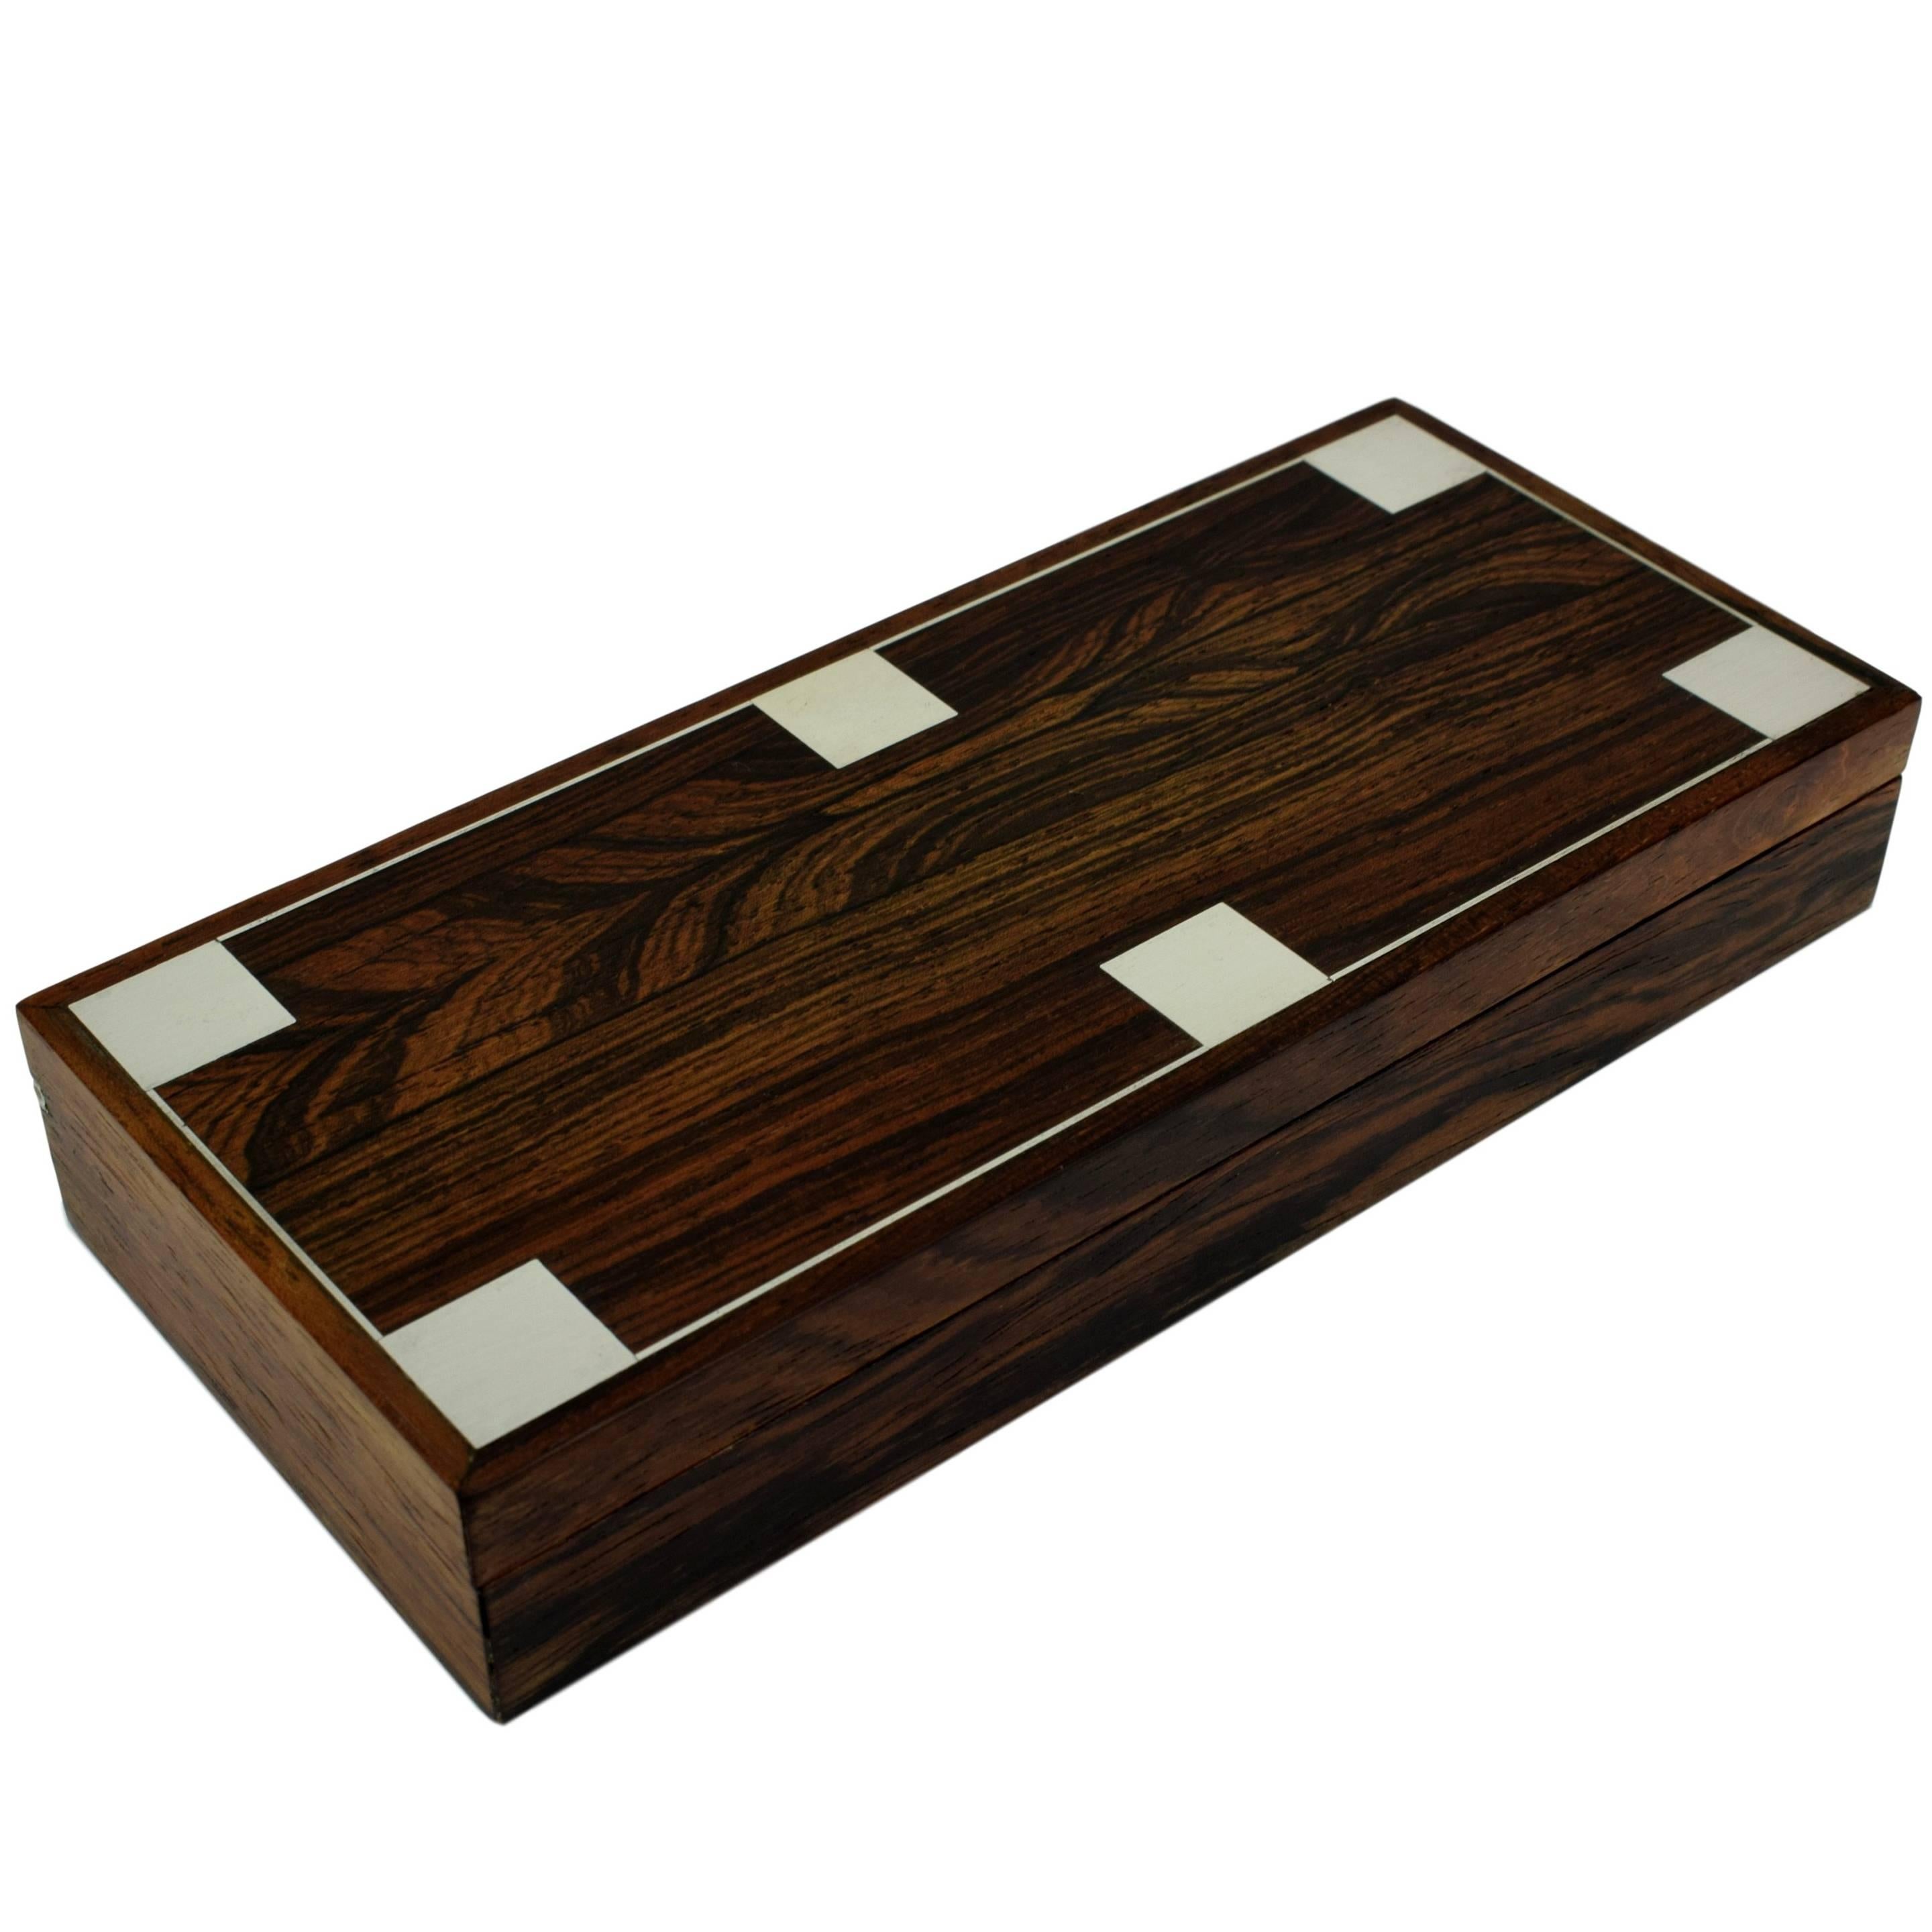 Danish Midcentury Rosewood Box with Sterling 925 Silver Inlays by Hans Hansen For Sale